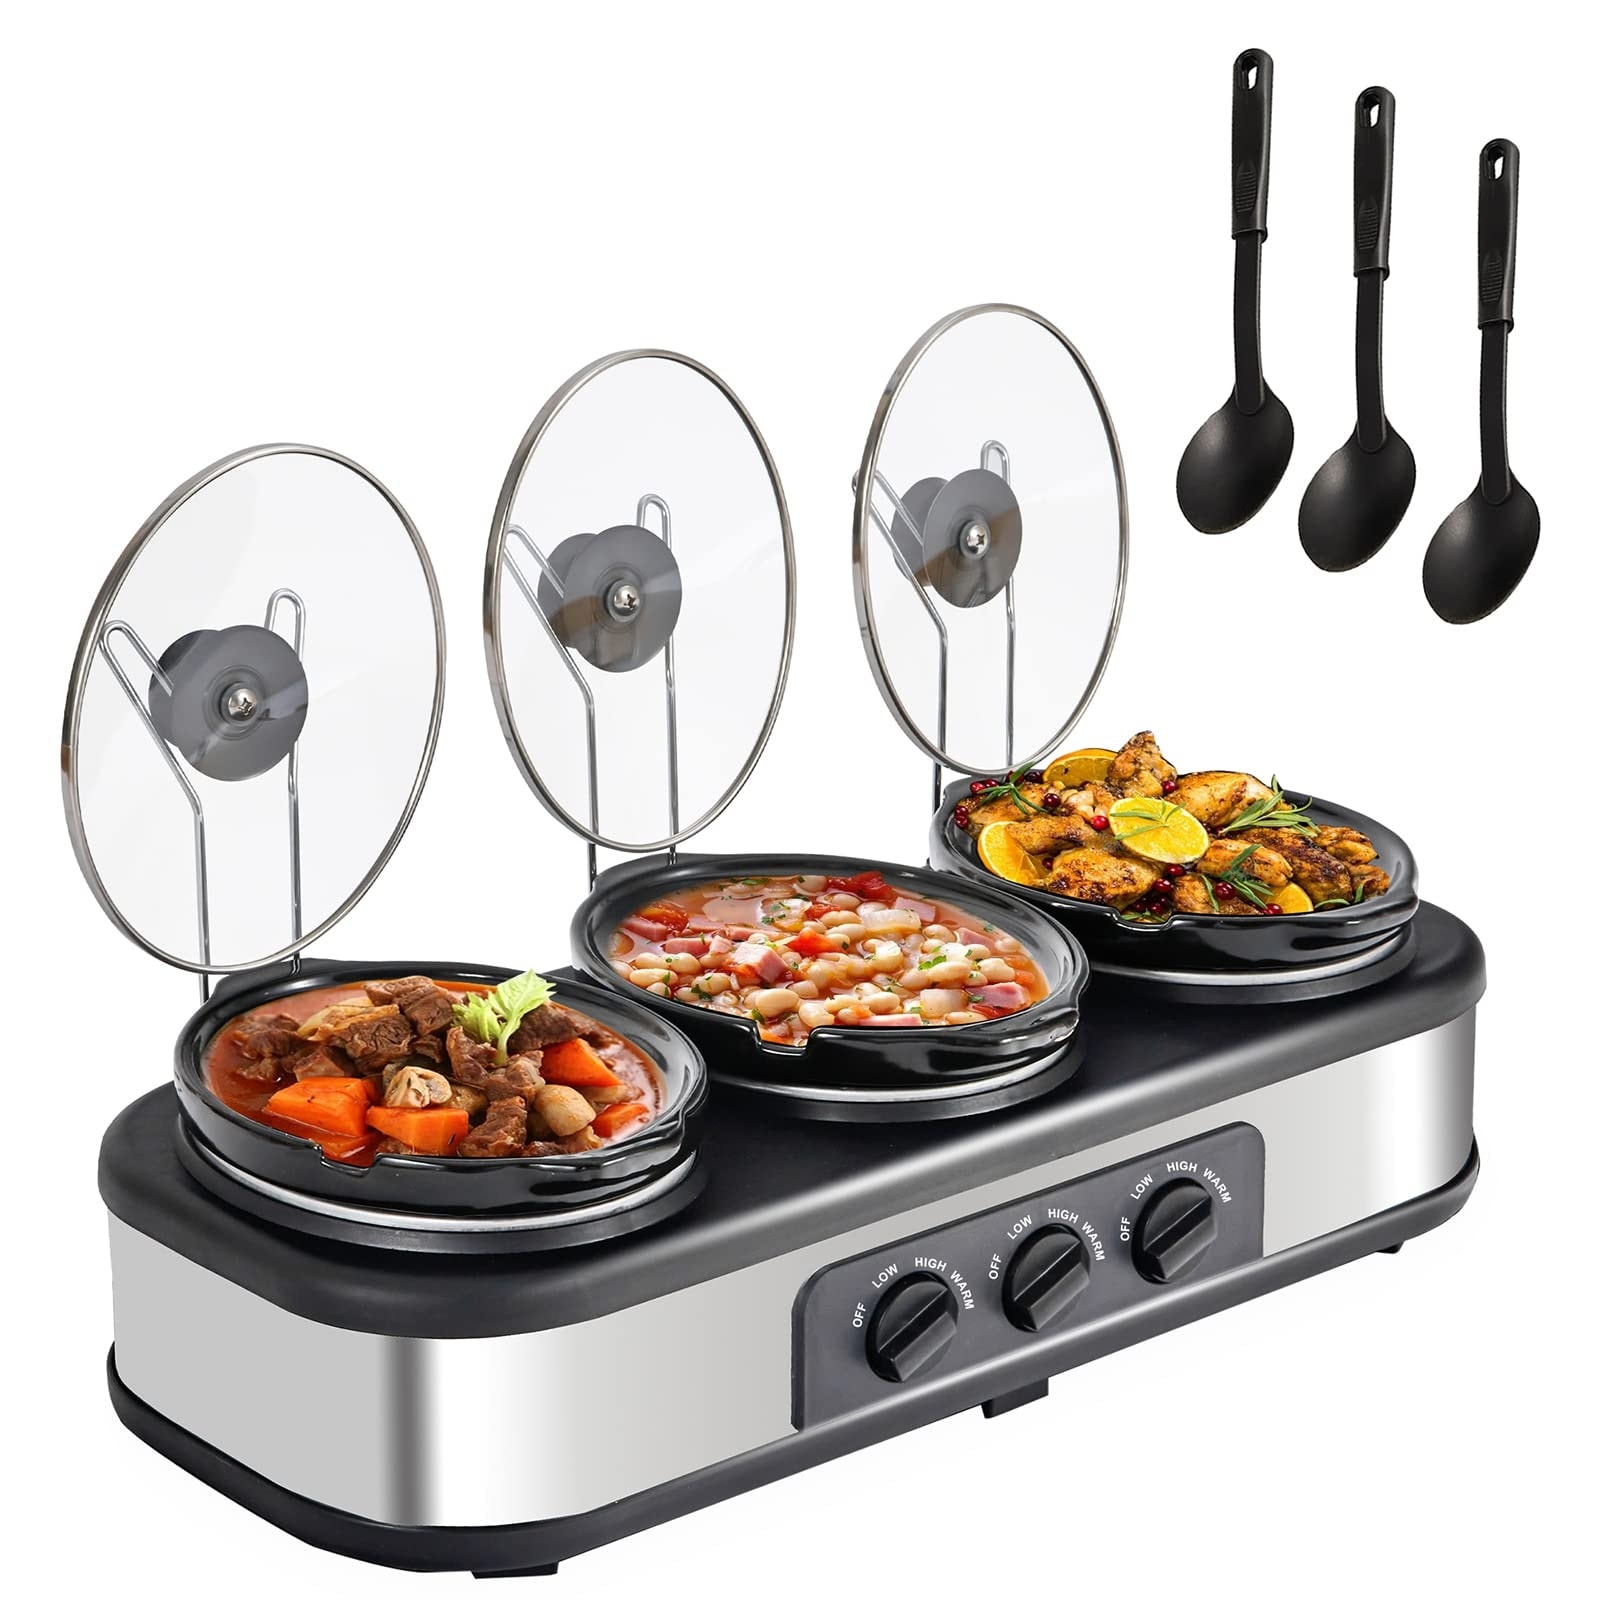 Triple Slow Cooker with 3 Spoons, 3 Pot 1.5 Quart Oval Crock Food Warmer  Buffet Server, Stainless Steel 